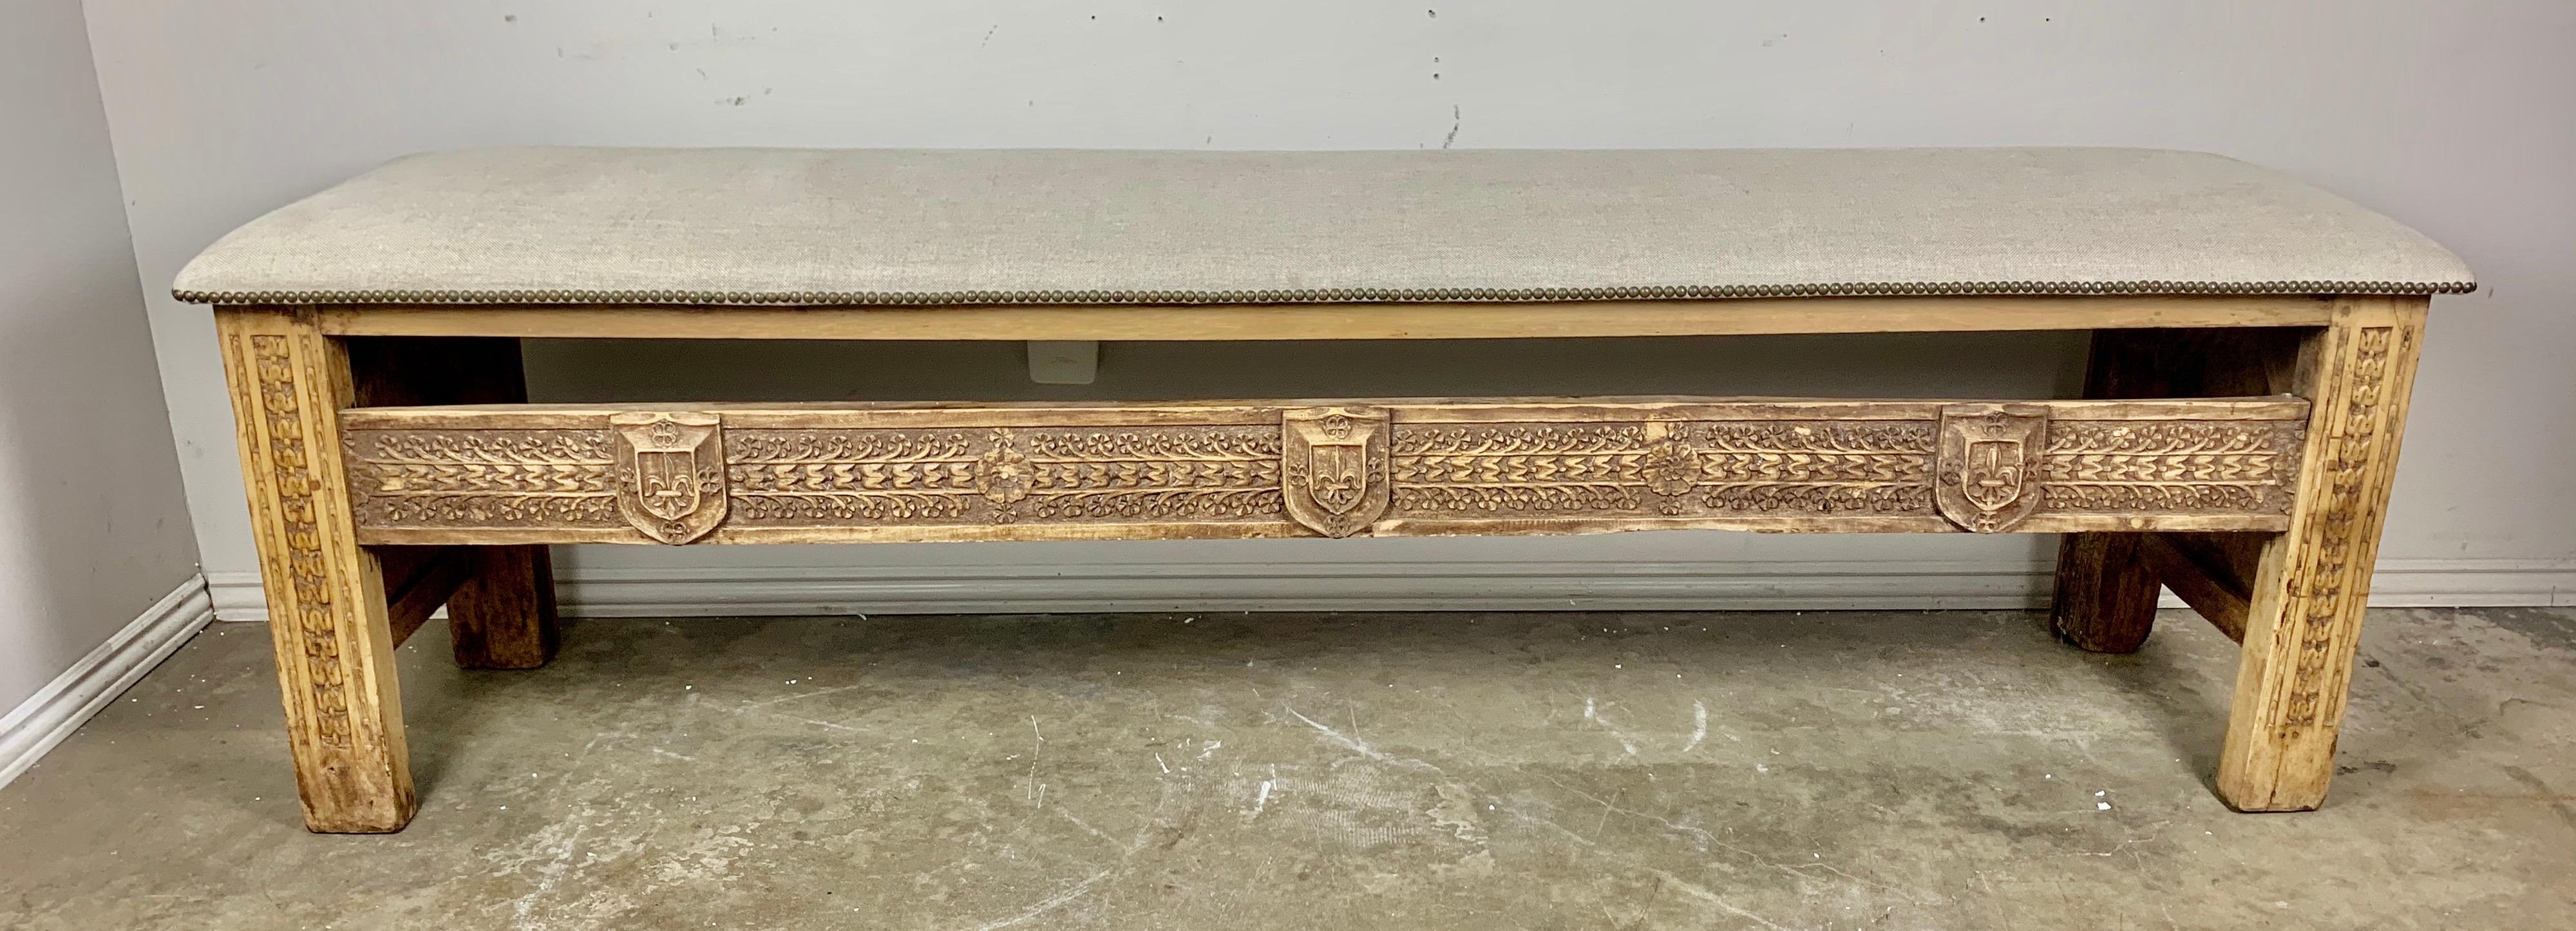 Early 19th century Spanish carved wood bench depicting beautiful detailed shields, fleur dys lis, and so much more. This monumental scaled bench has been newly upholstered in Belgium linen with antique brass nailheads.